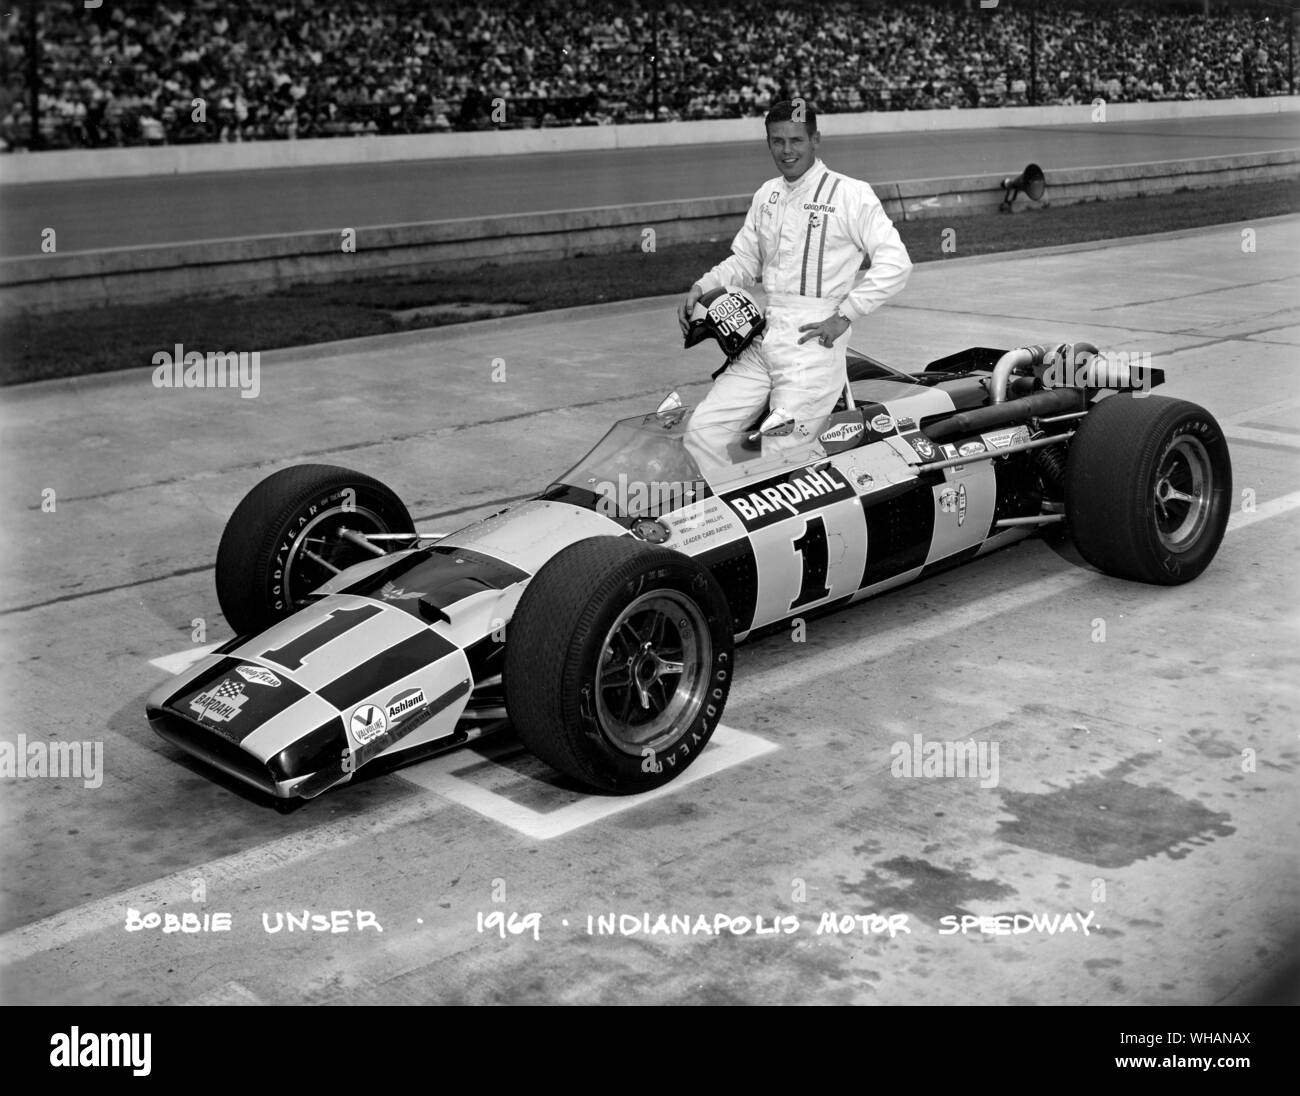 Bobby Unser 1969. Indianapolis Motor Speedway Stock Photo